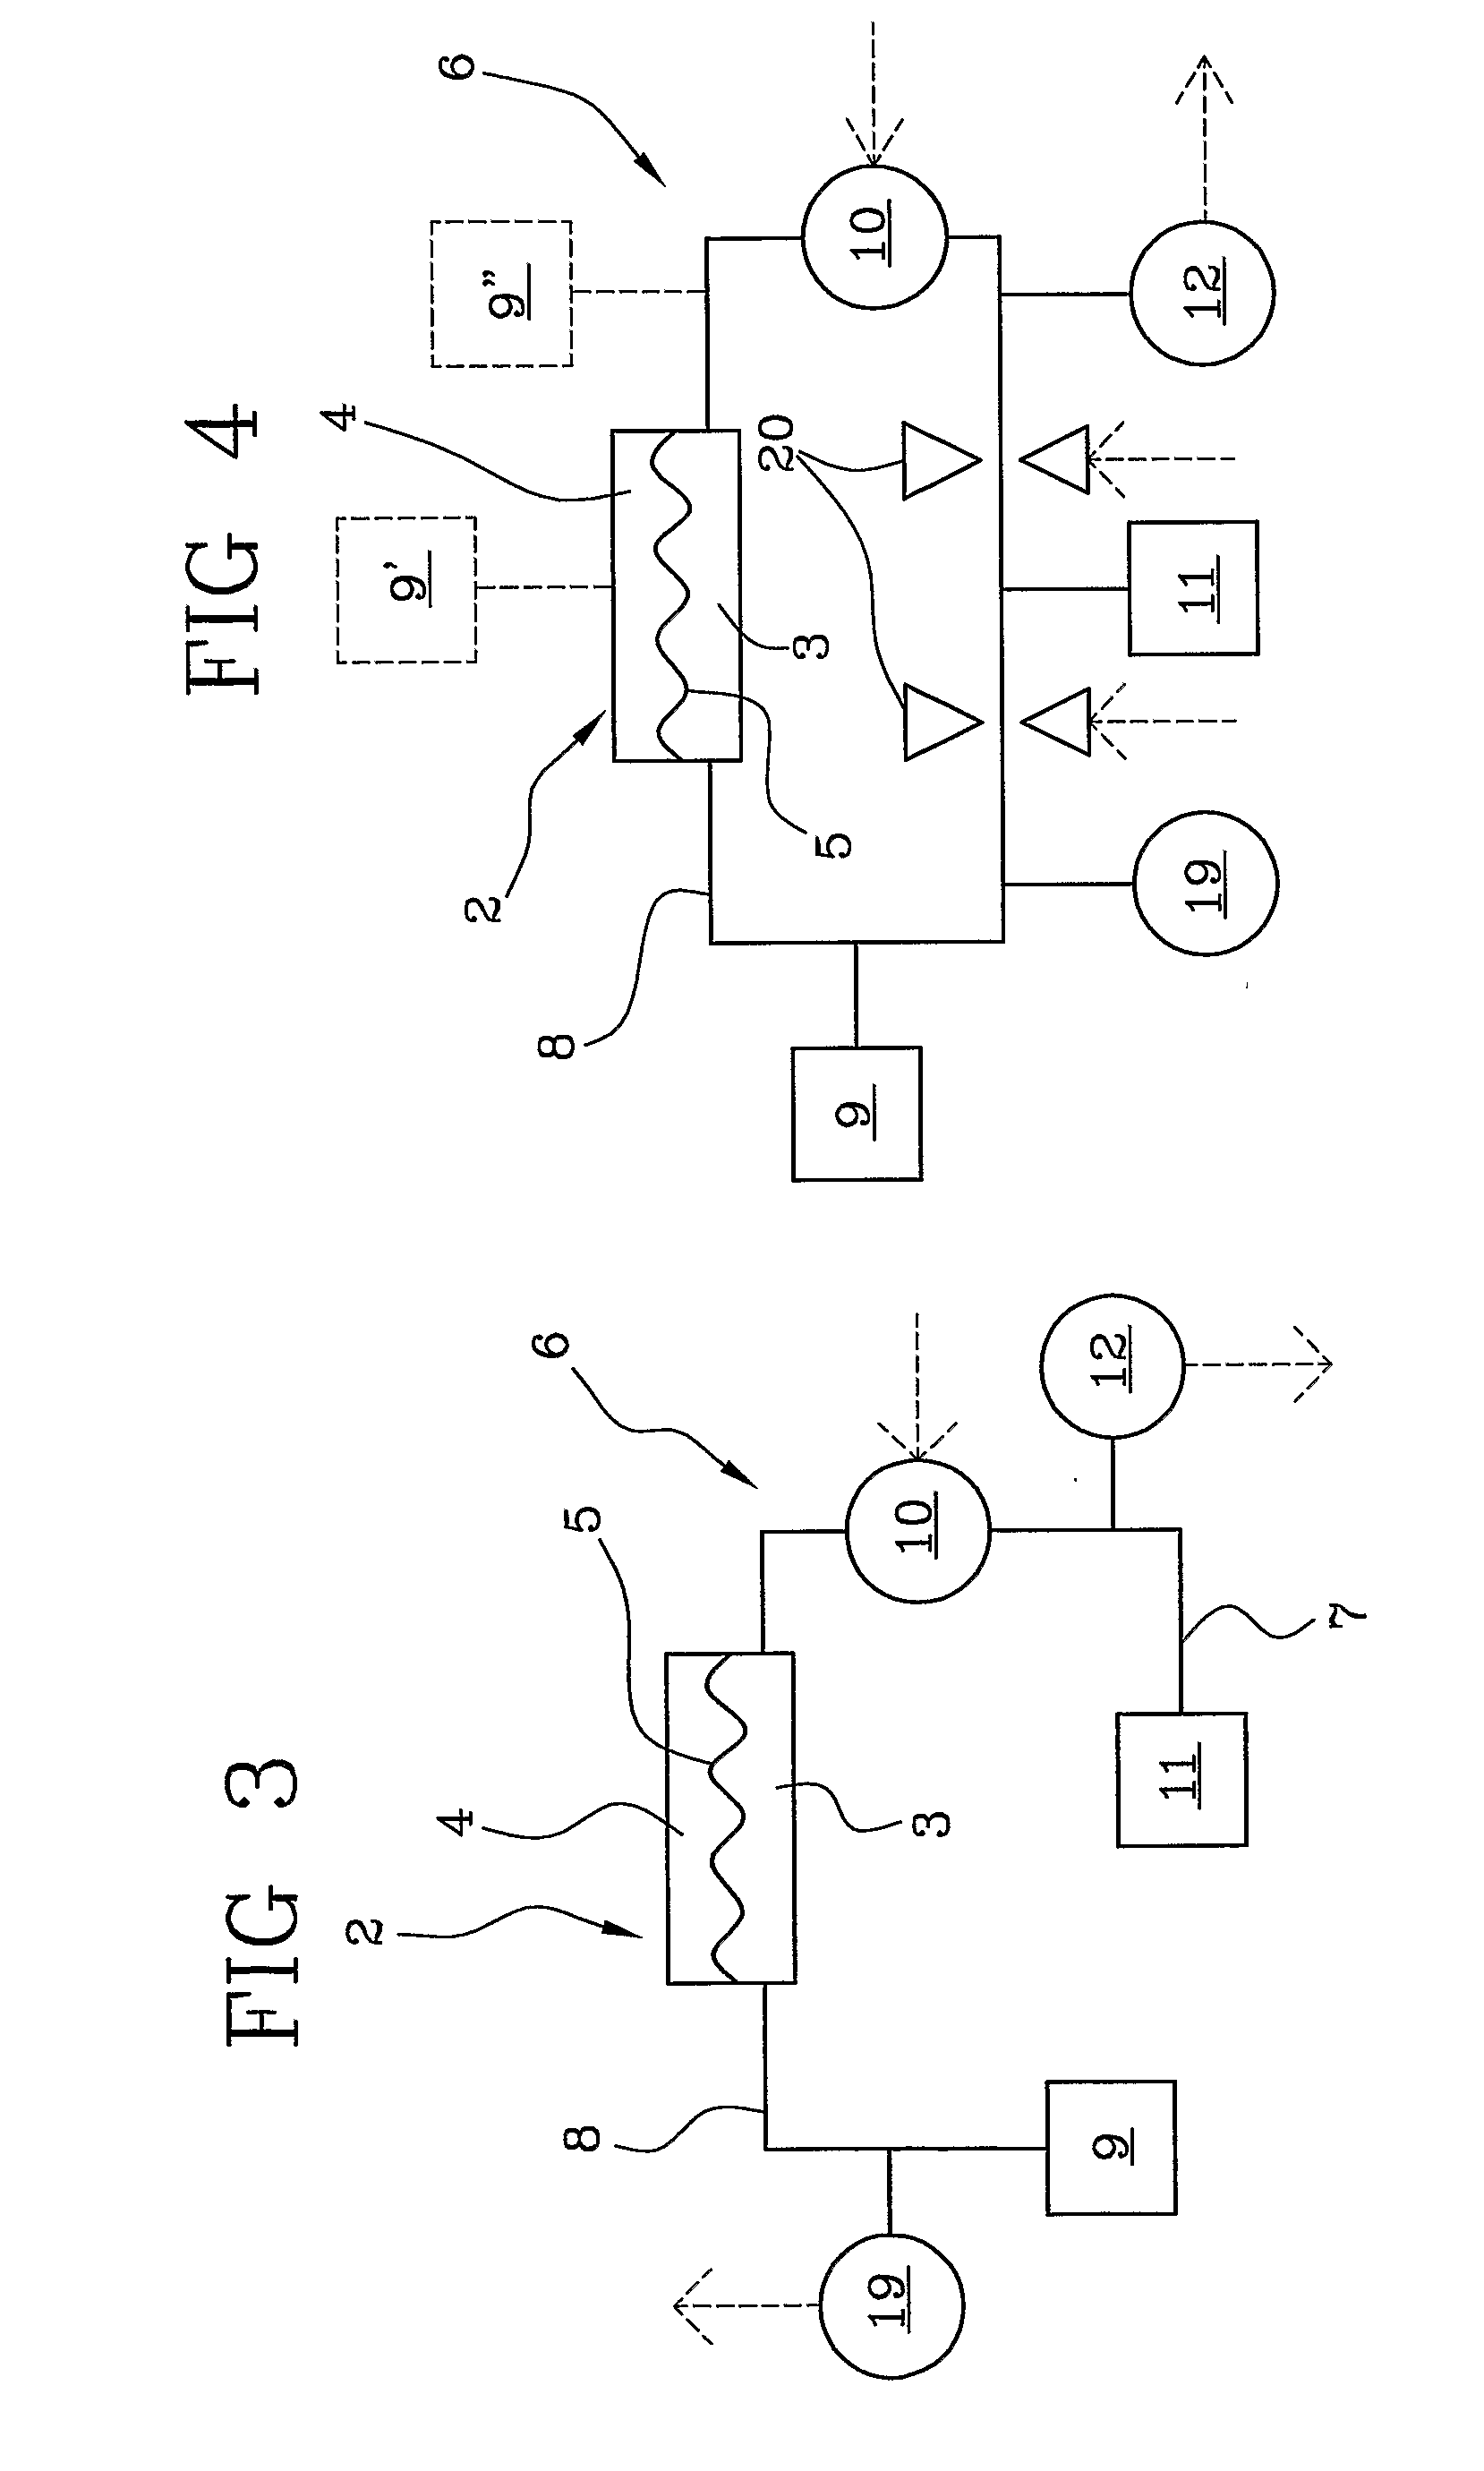 Apparatus for extracorporeal blood treatment